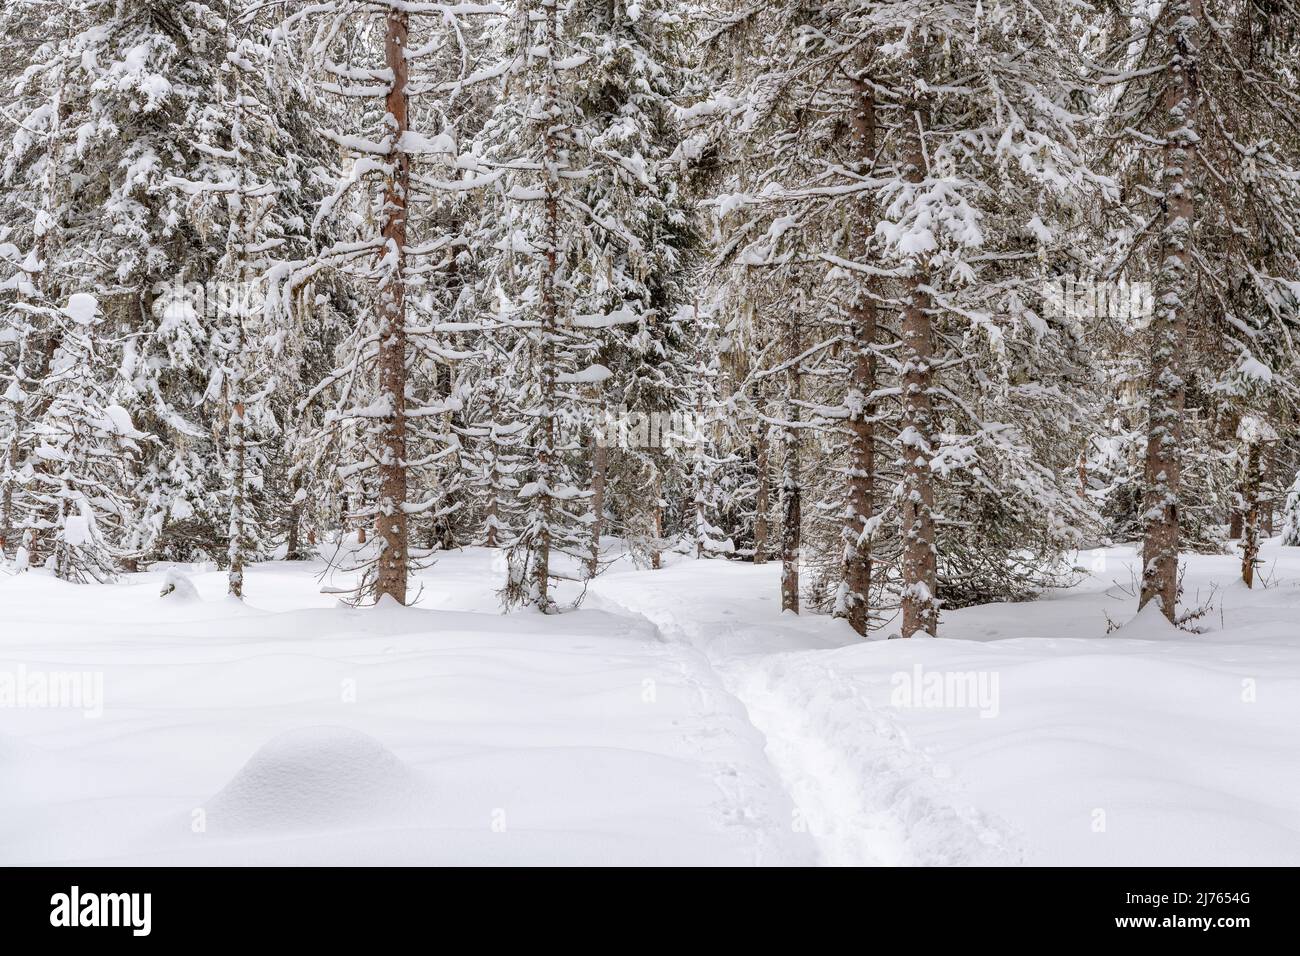 A trail of snowshoes leads across a snowy area towards a coniferous forest with spruce trees. Everything is covered with white snow. Stock Photo